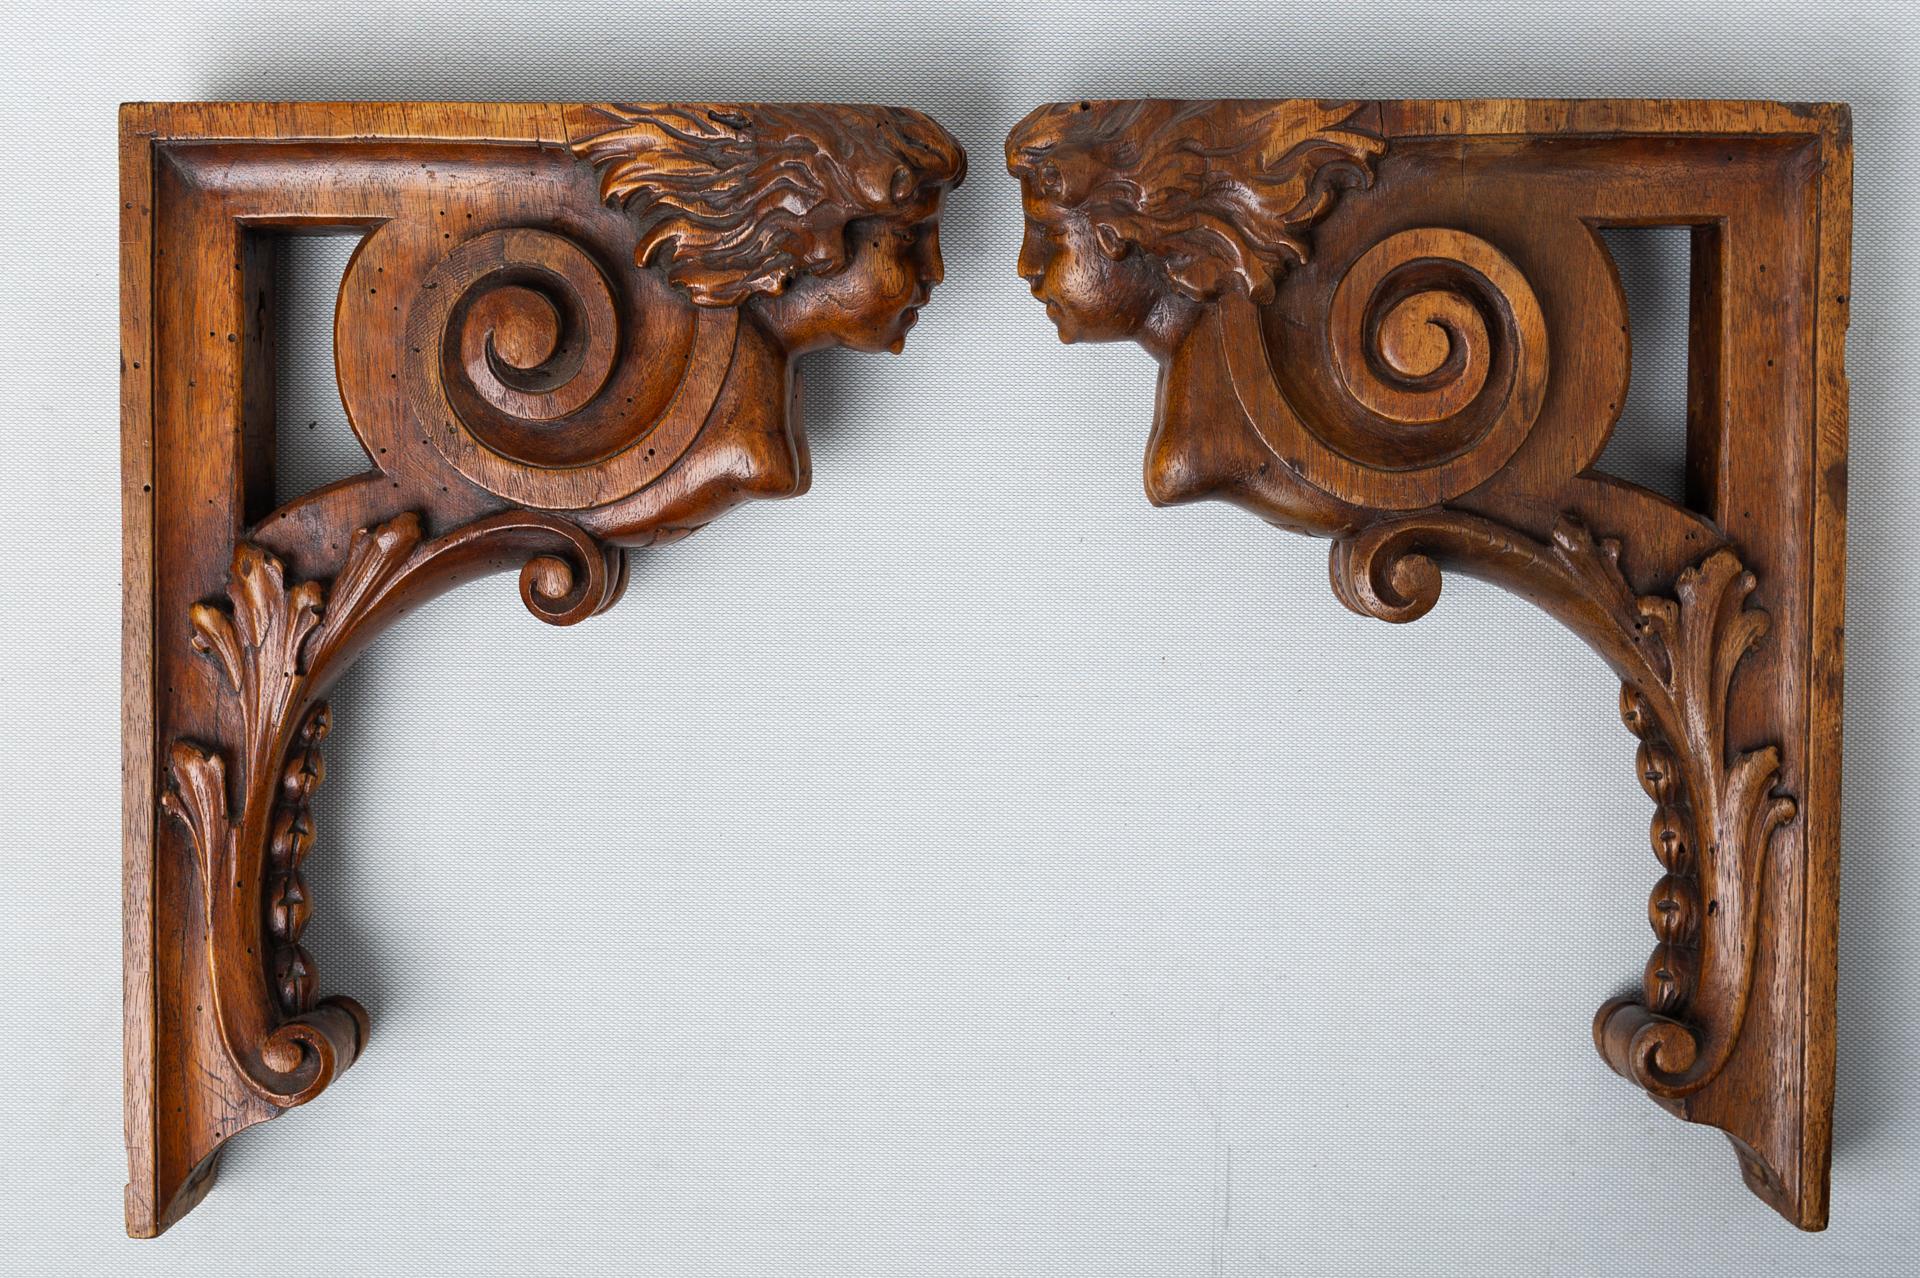 Italian Wooden Antique Venetian Shelves with Caryatids, Wall Consoles For Sale